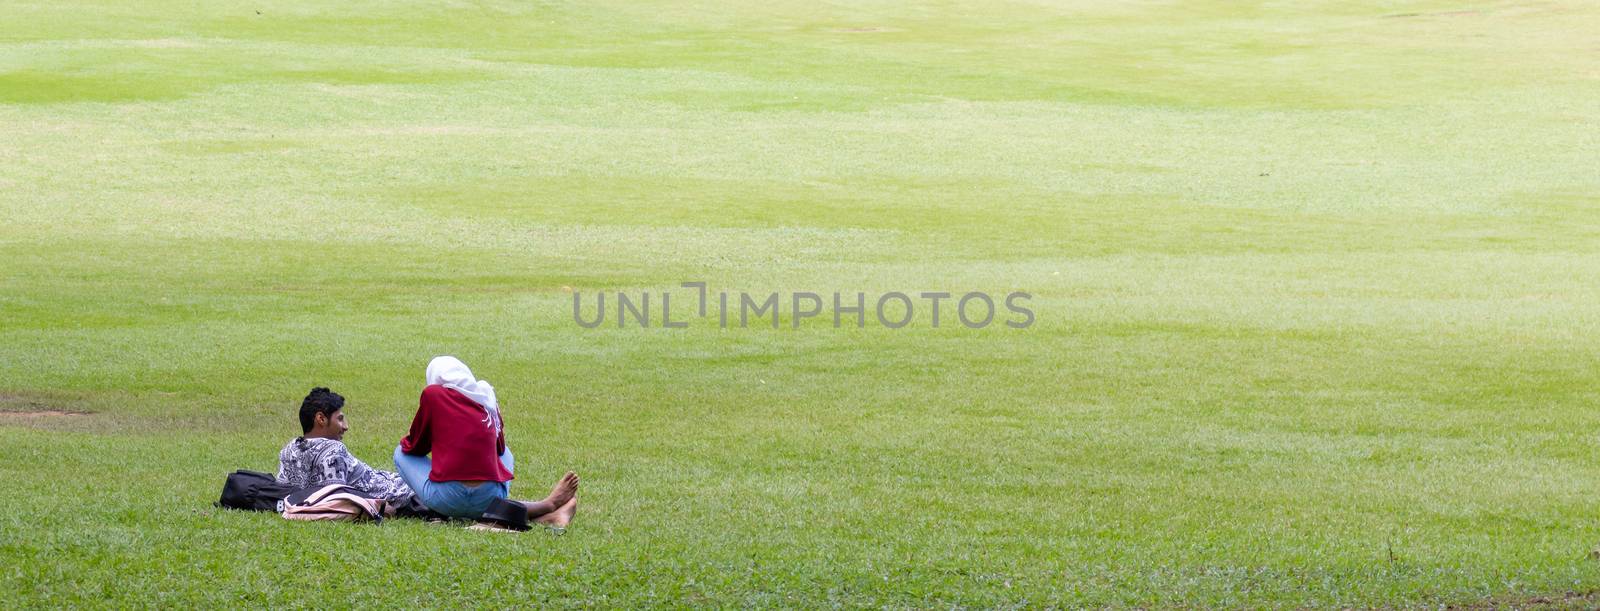 Young Couple Relaxing in Victoria park grass field.